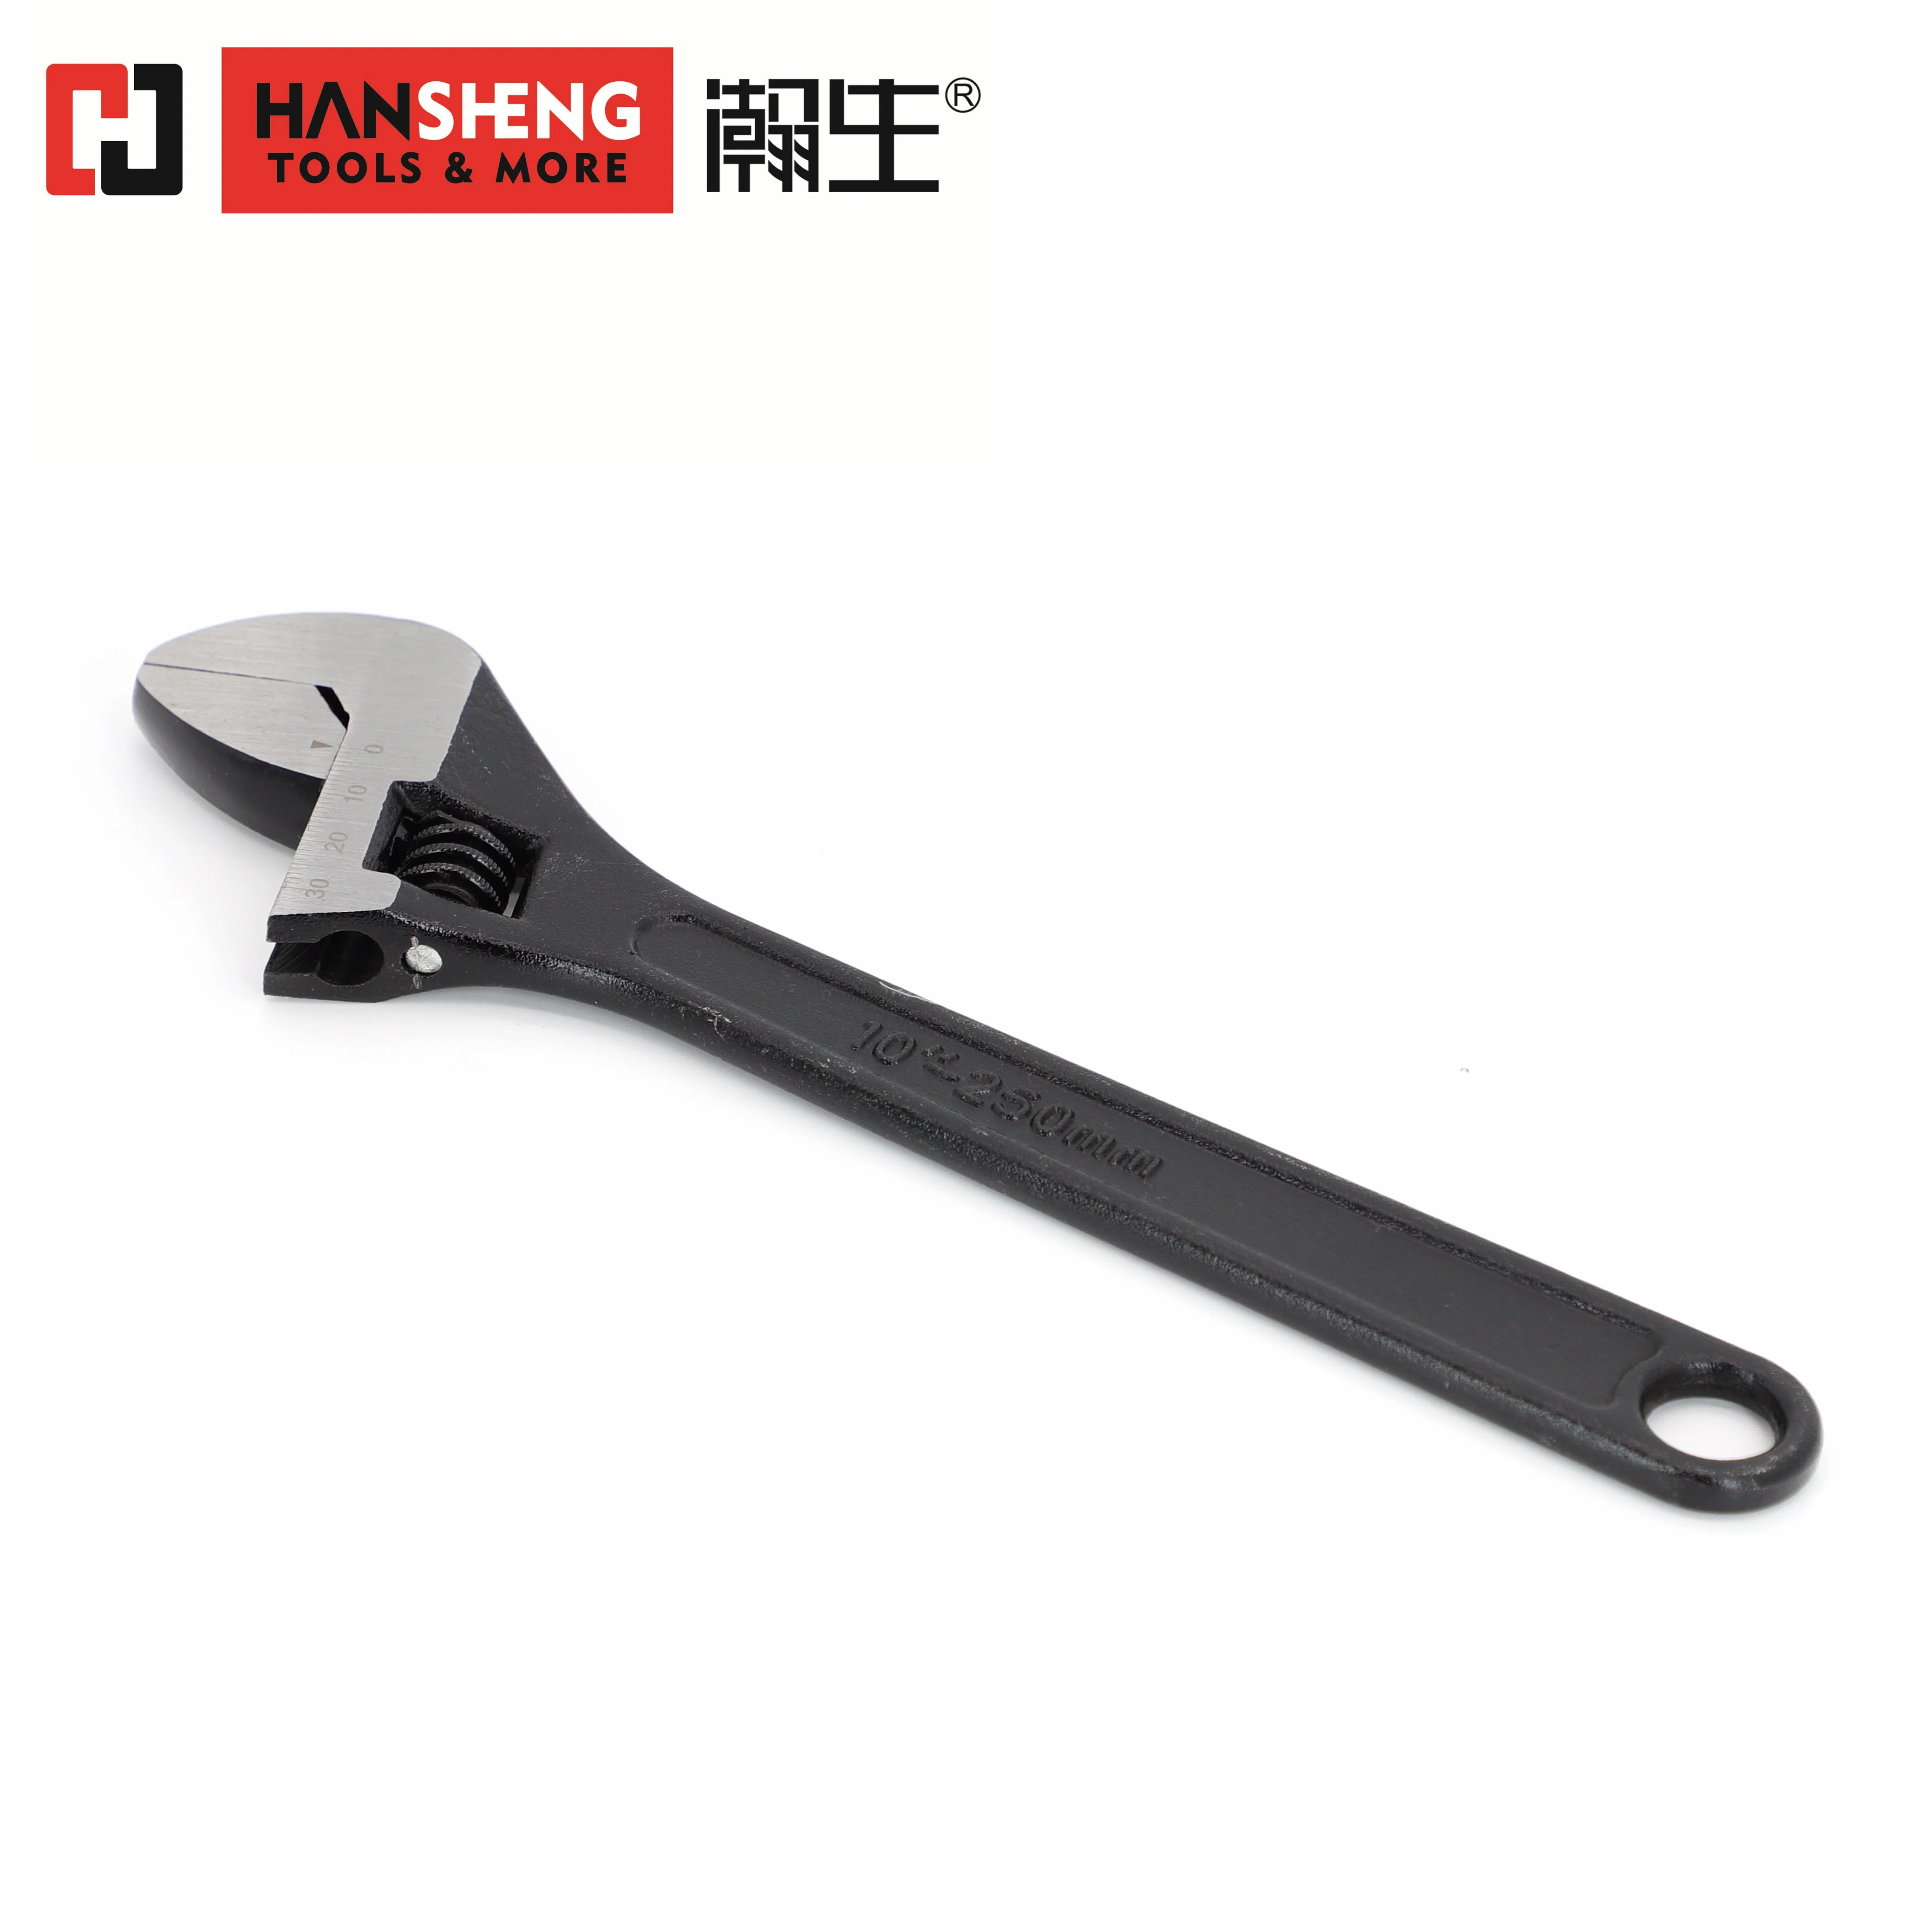 Professional Hand Tool, Hardware, High quality/High cost performance , Adjustable Wrench, Adjustable Spanner